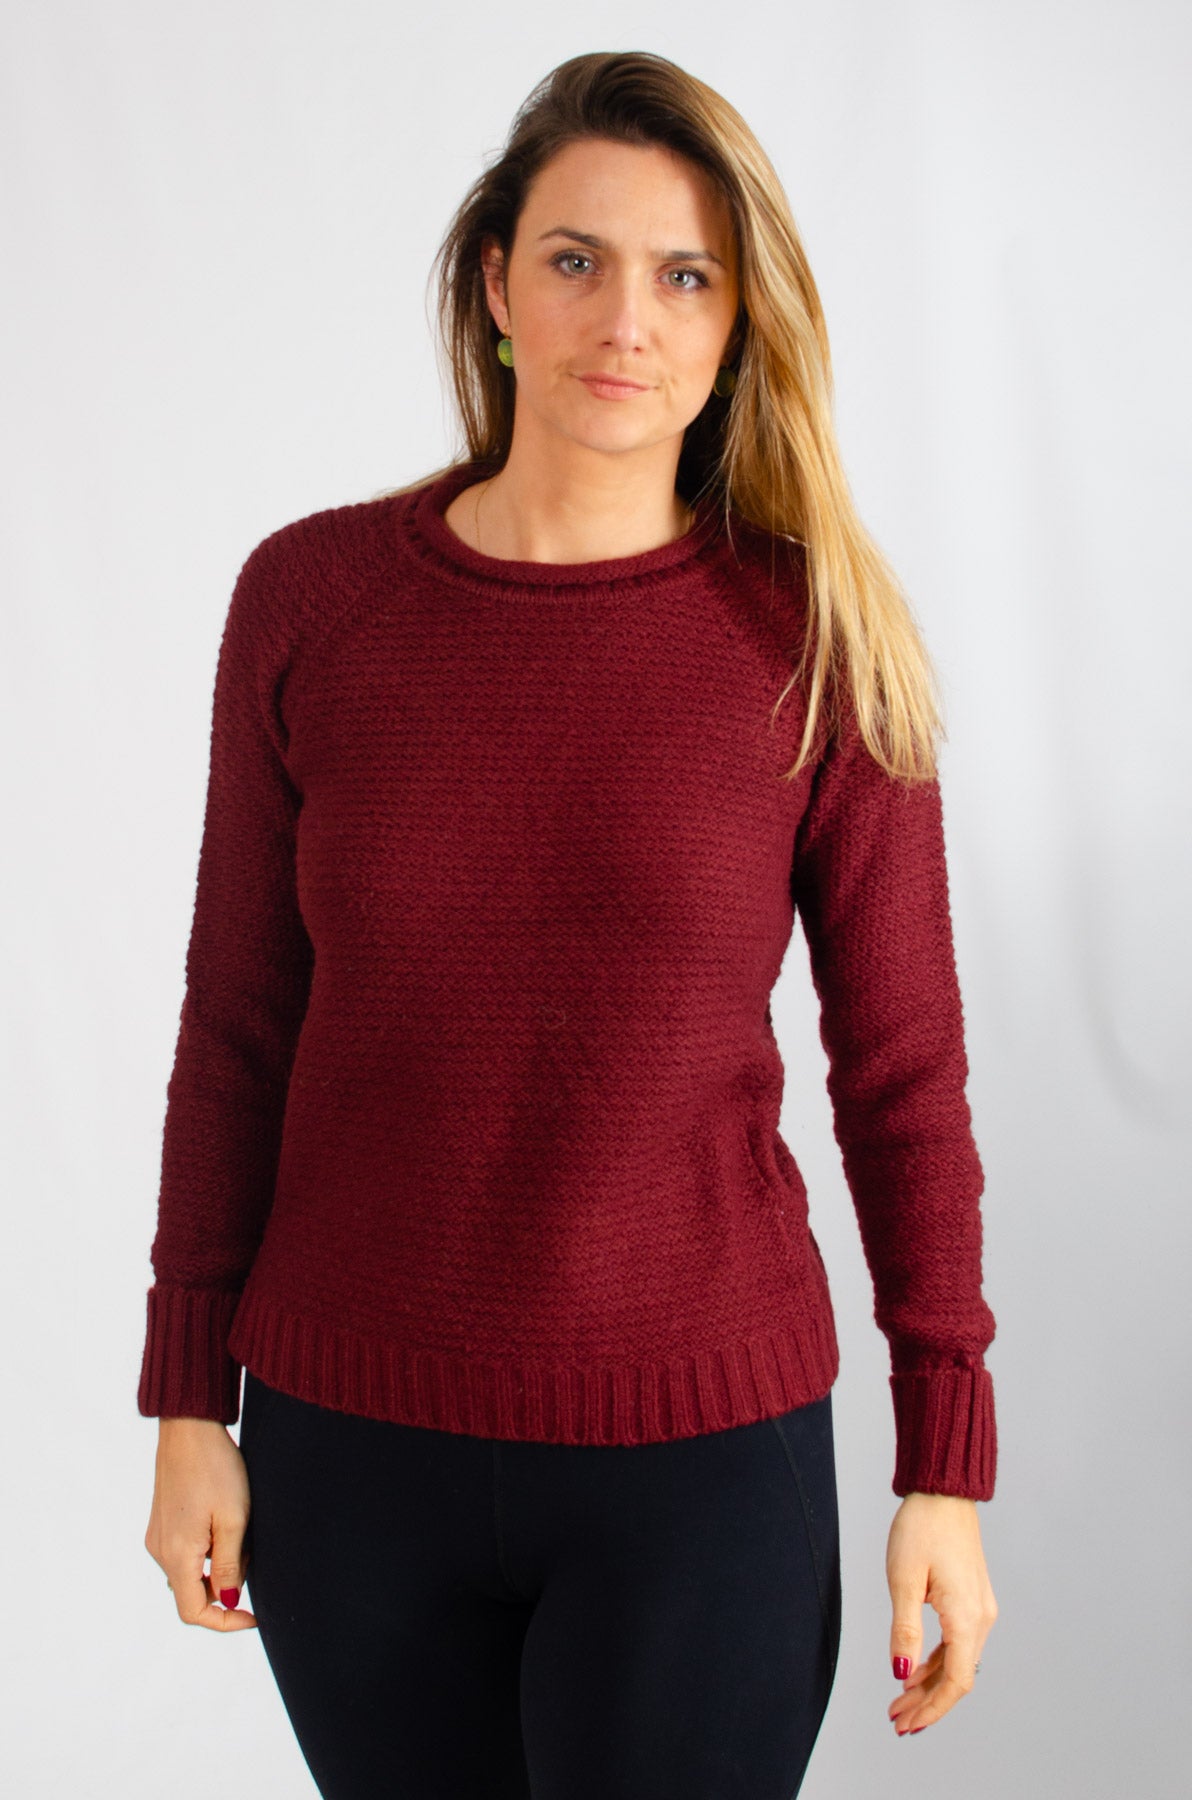 Texture Knit Rolled Edge Neck Jumper